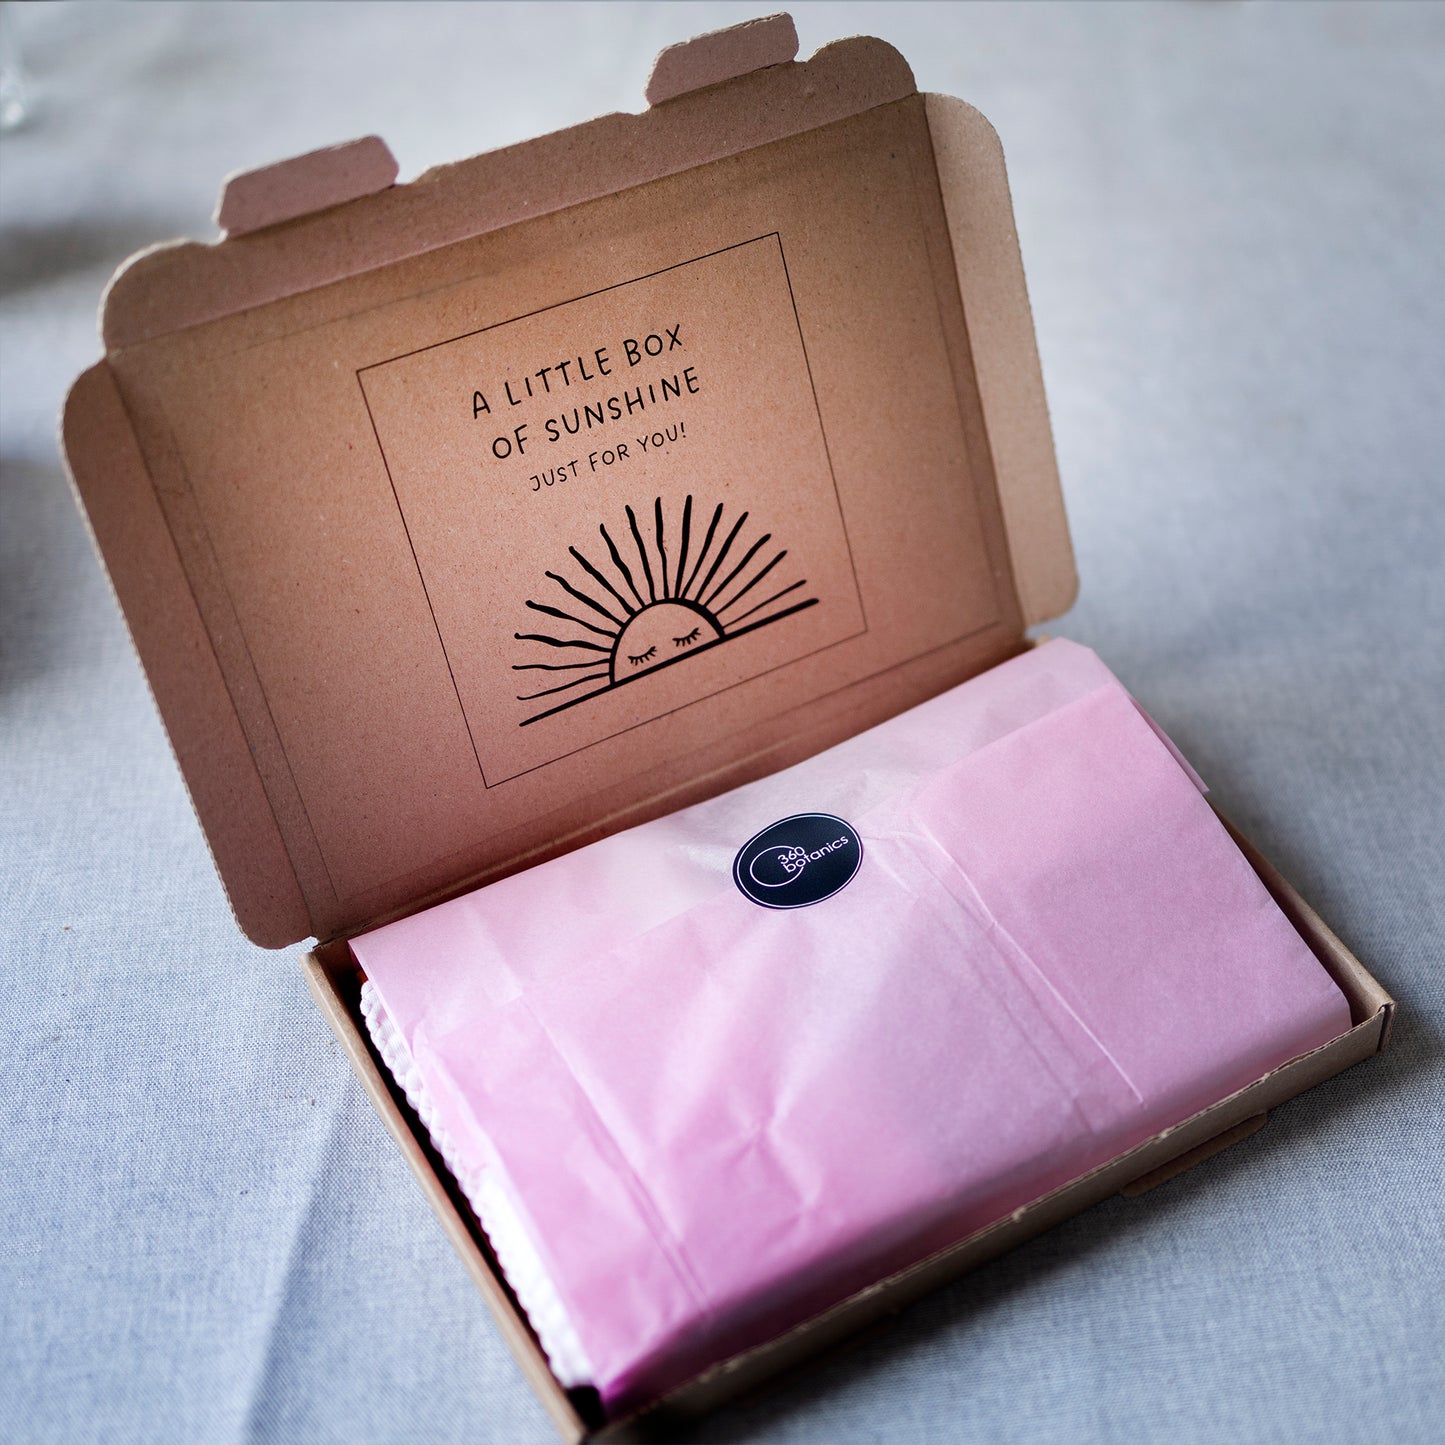 Open kraft paper gift box from 360 Botanics, revealing a delicate pink tissue-wrapped package inside, sealed with a branded sticker. The box lid features the message 'A LITTLE BOX OF SUNSHINE JUST FOR YOU!' with a sunburst design, conveying a personalized and uplifting unboxing experience